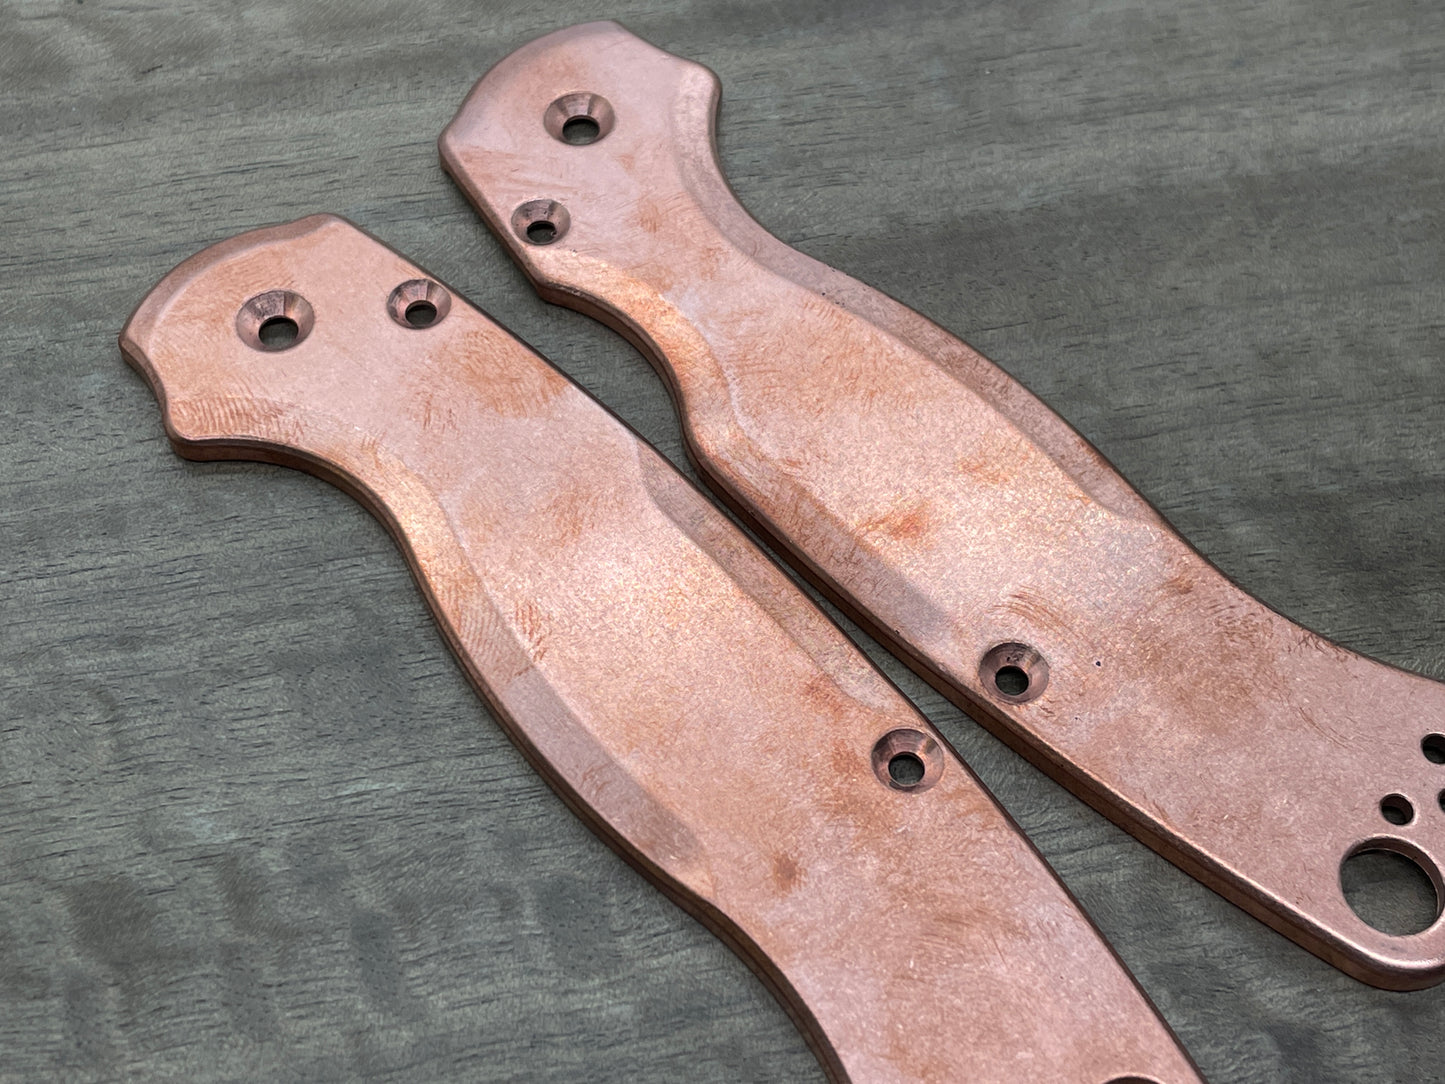 Tumbled Copper scales for Spyderco Paramilitary 2 PM2